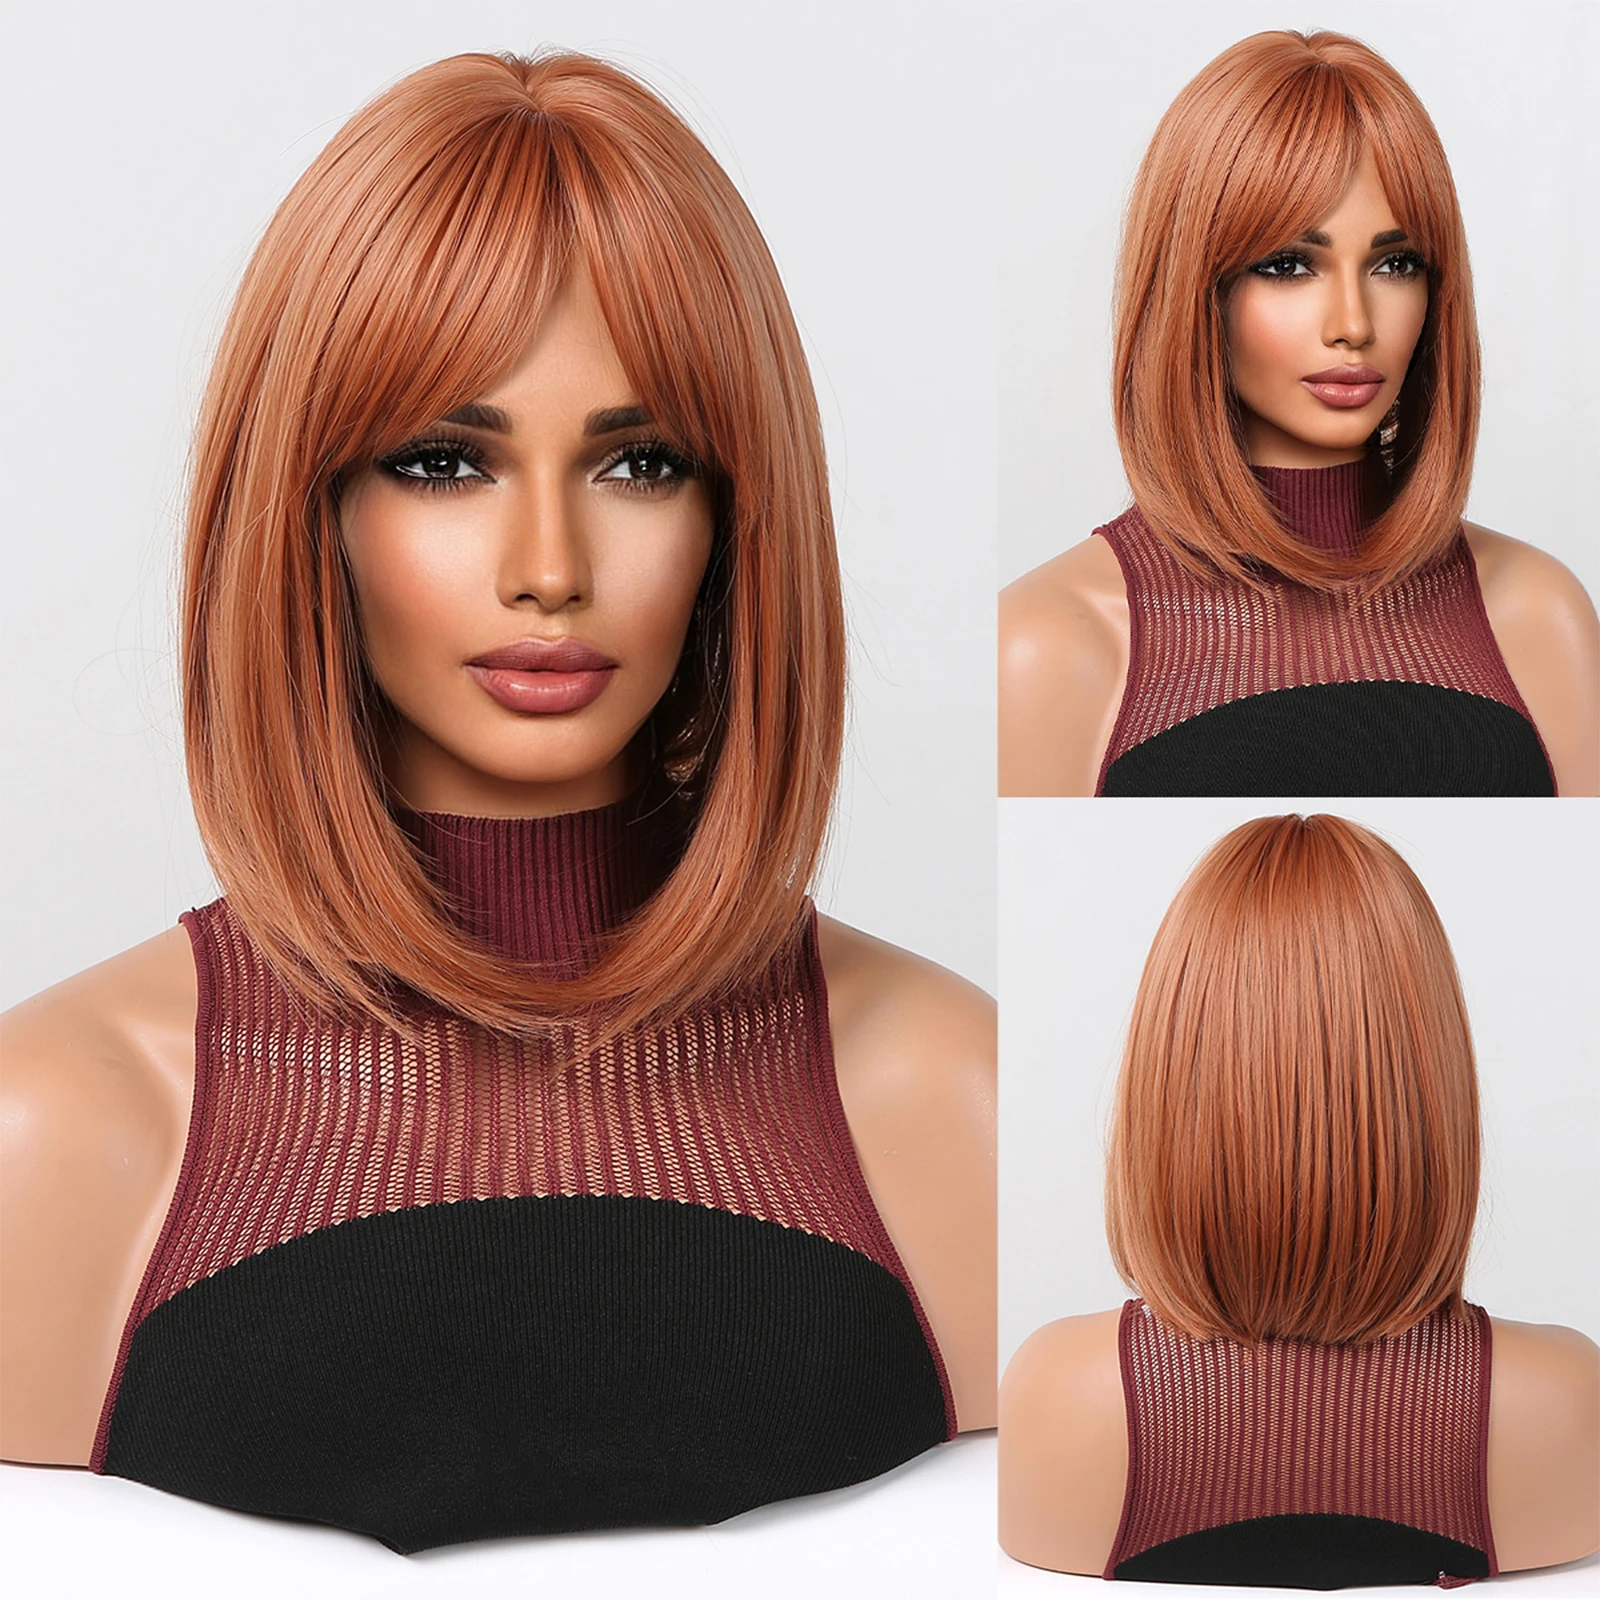 EASIHAIR Copper Ginger Synthetic Wigs Short Straight Cosplay Wig with Bangs for Black Women Heat Resistant Daily Natural Hair